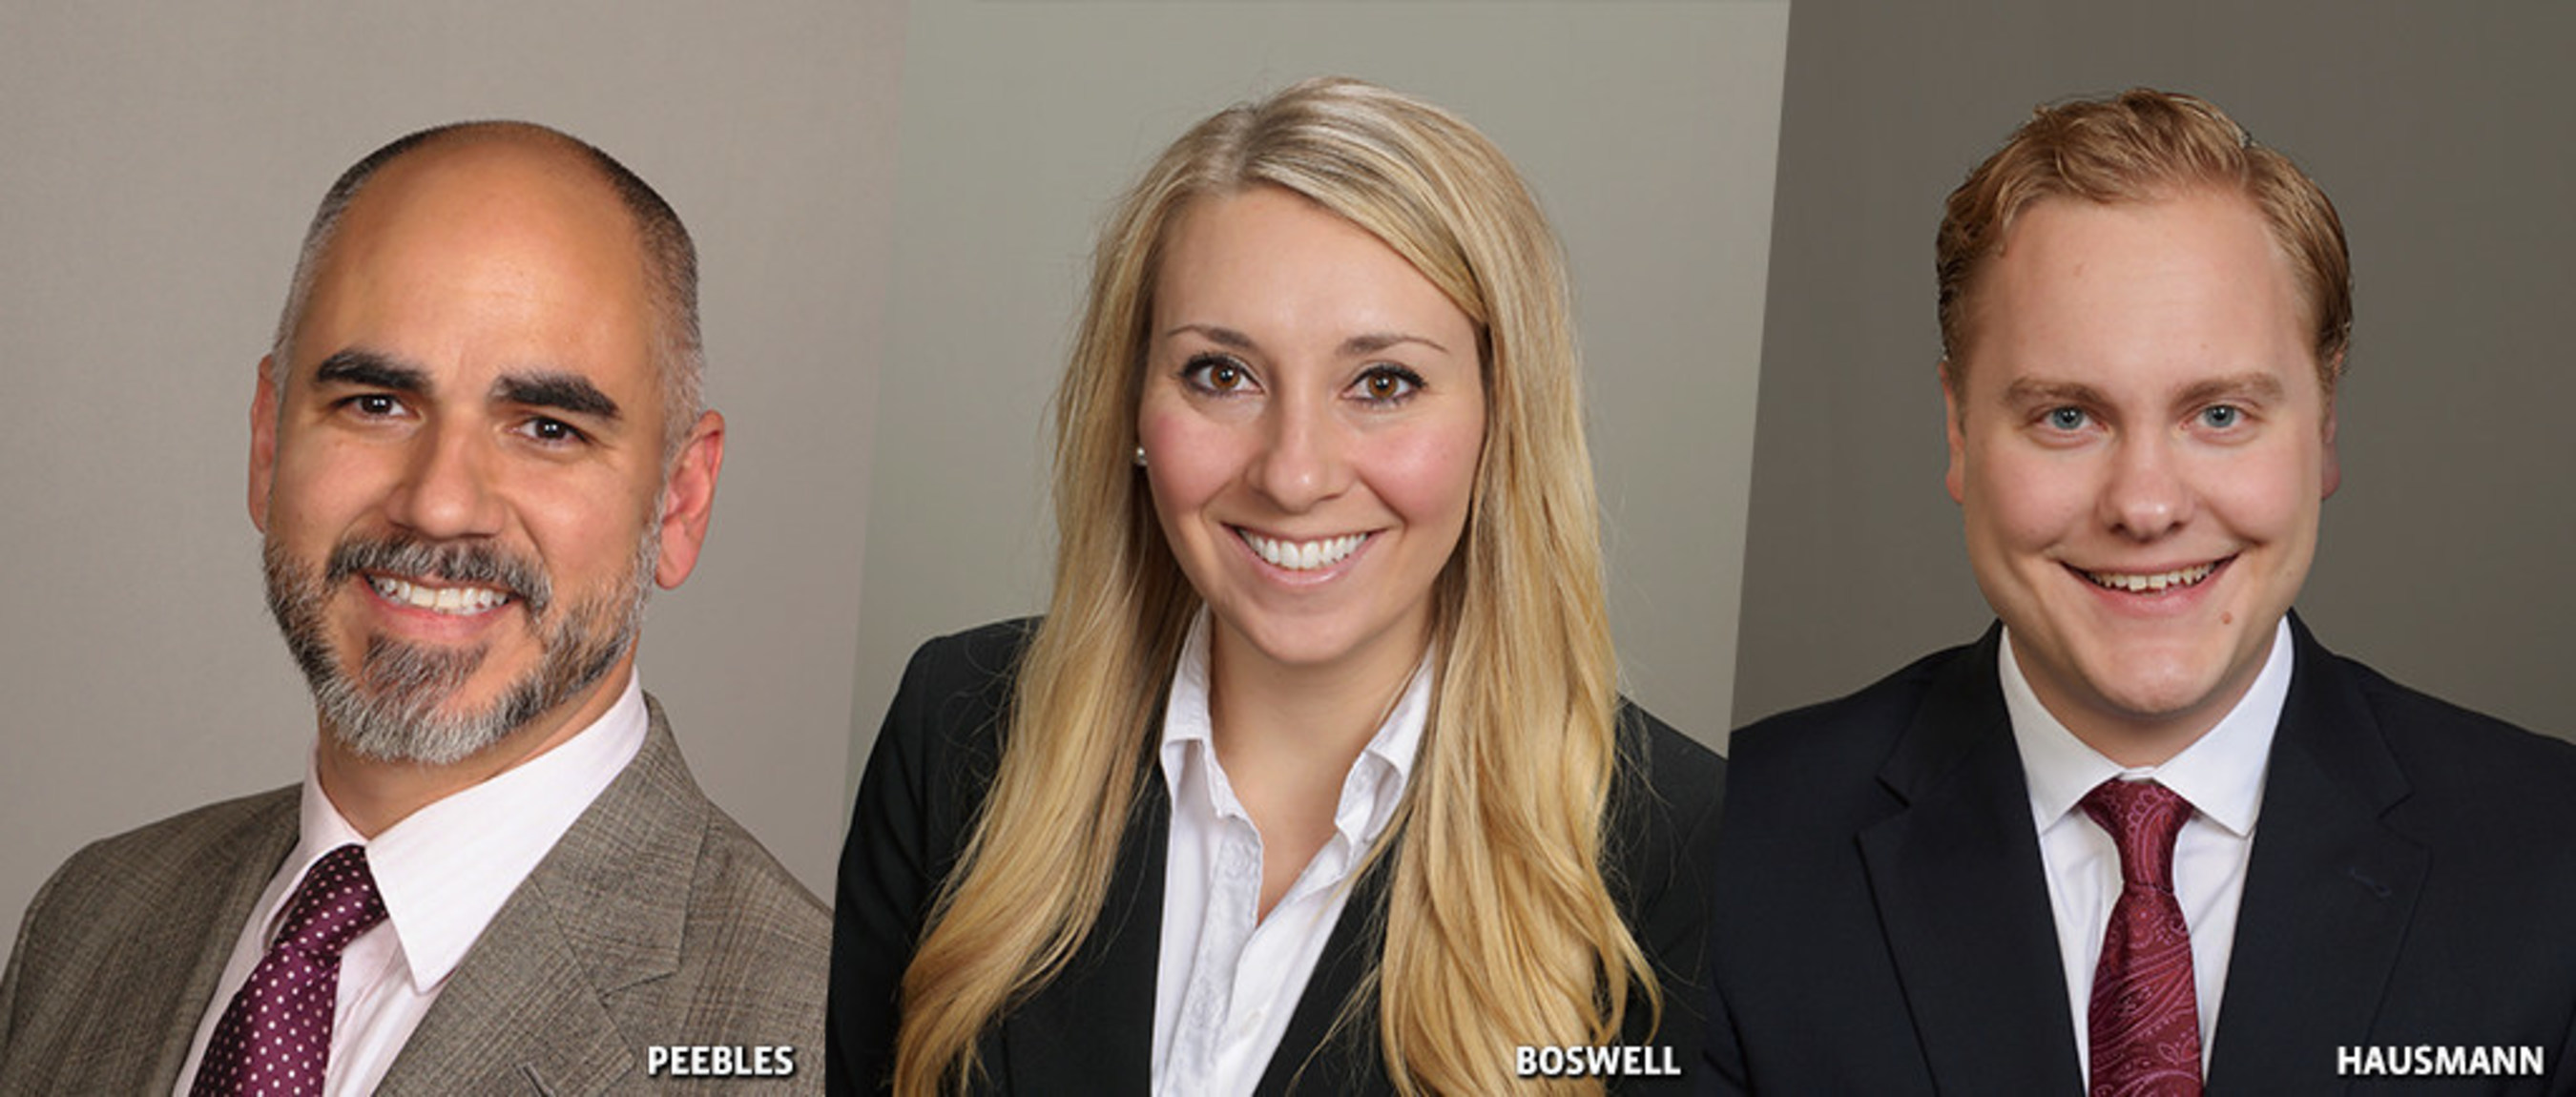 We welcome Scott Peebles, Brittany Boswell and Jared Hausmann to our San Francisco, New York and Alton offices.